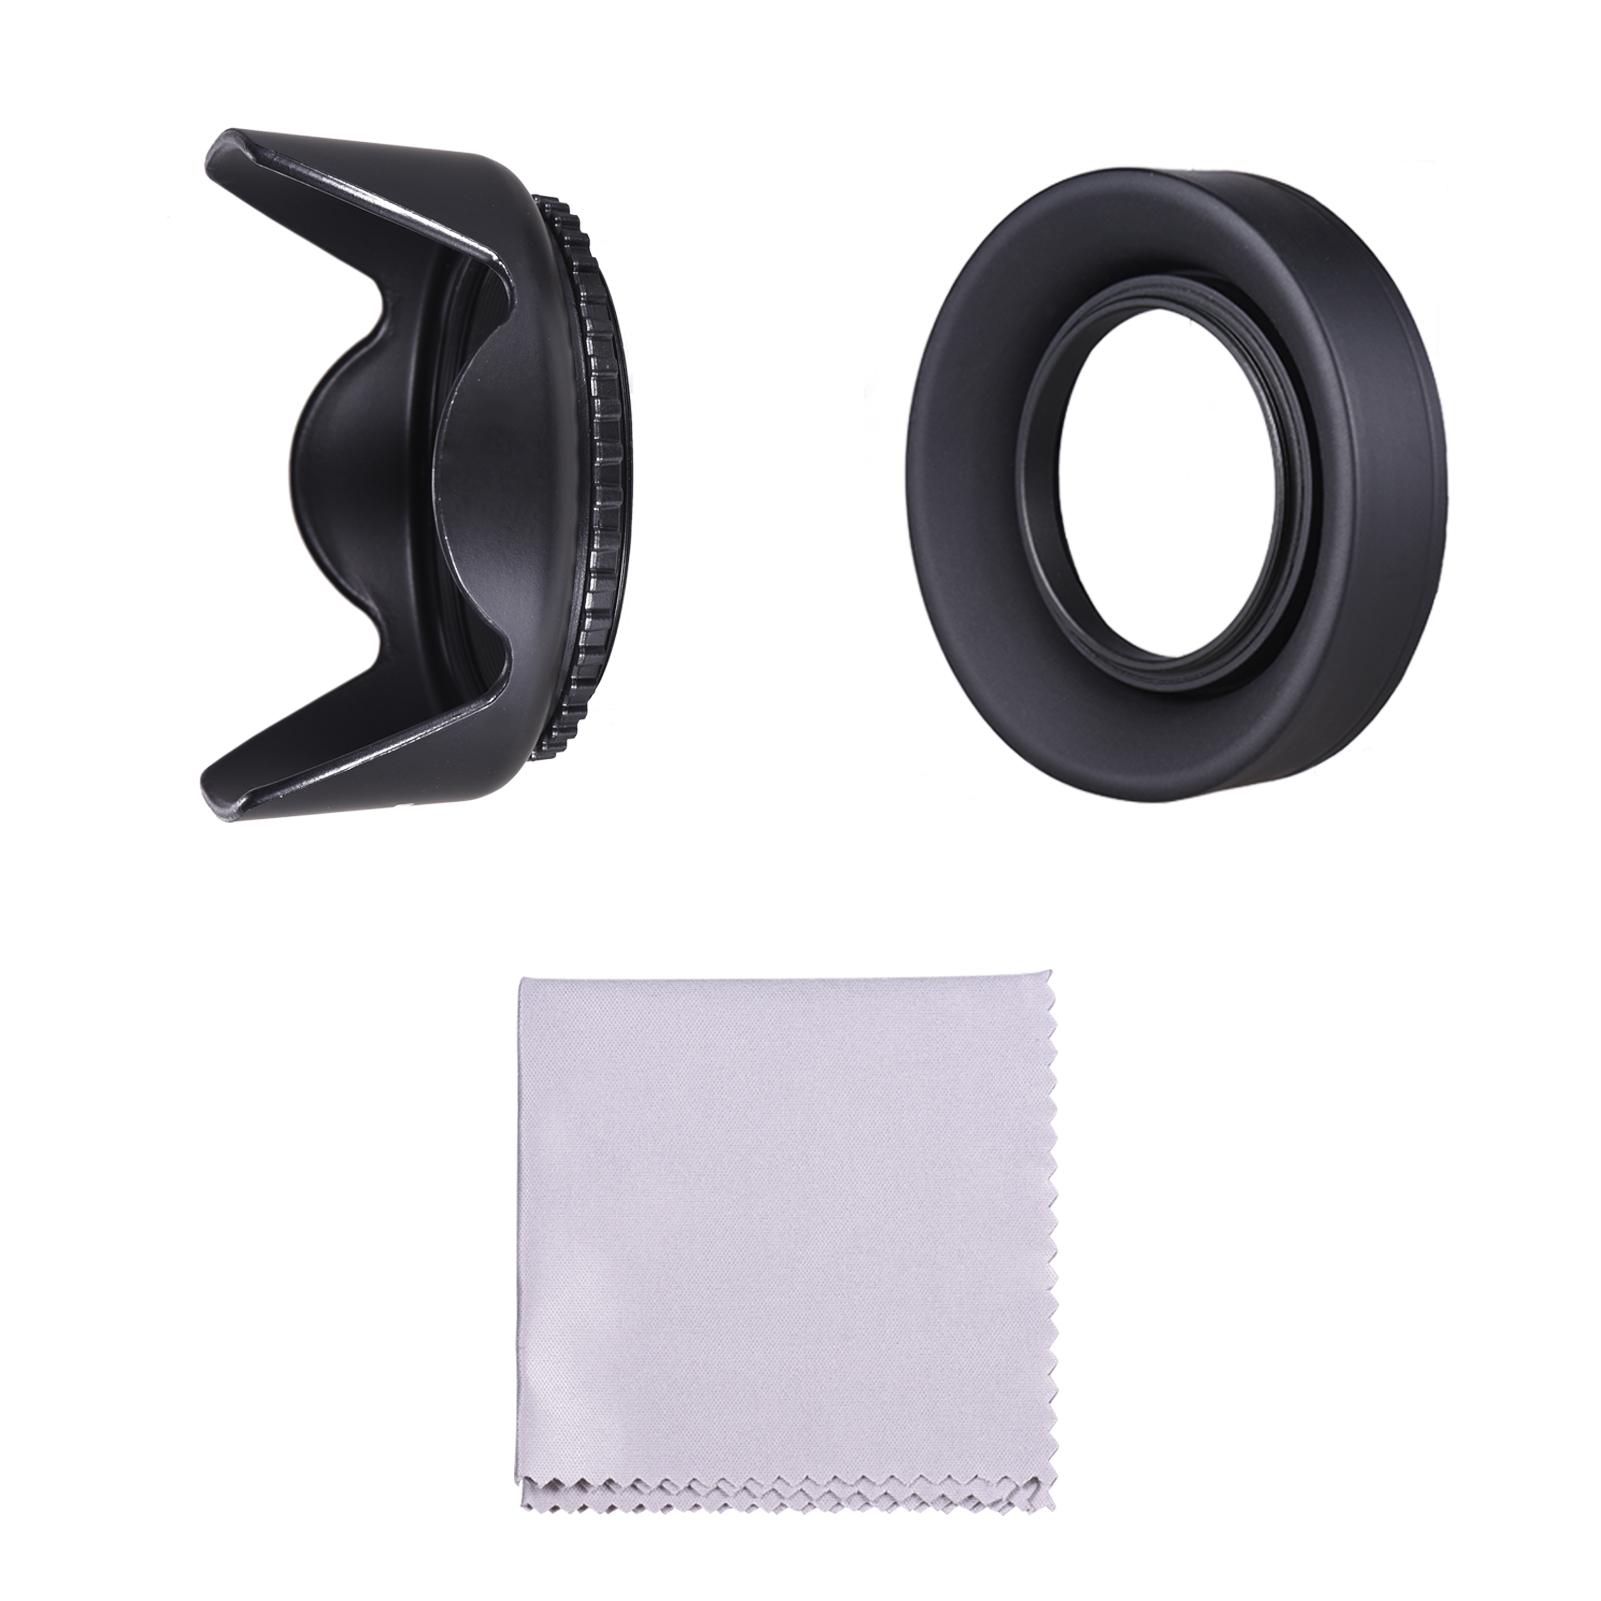 67mm Lens Hood Set with Tulip Flower Lens Hood + Collapsible Rubber Lens Hood + Lens Cleaning Cloth Replacement for Canon EOS 7D 70D 77D 80D 90D Rebel T7i T6i T6s for Canon EF-S 18-135mm f/3.5-5.6 Lens